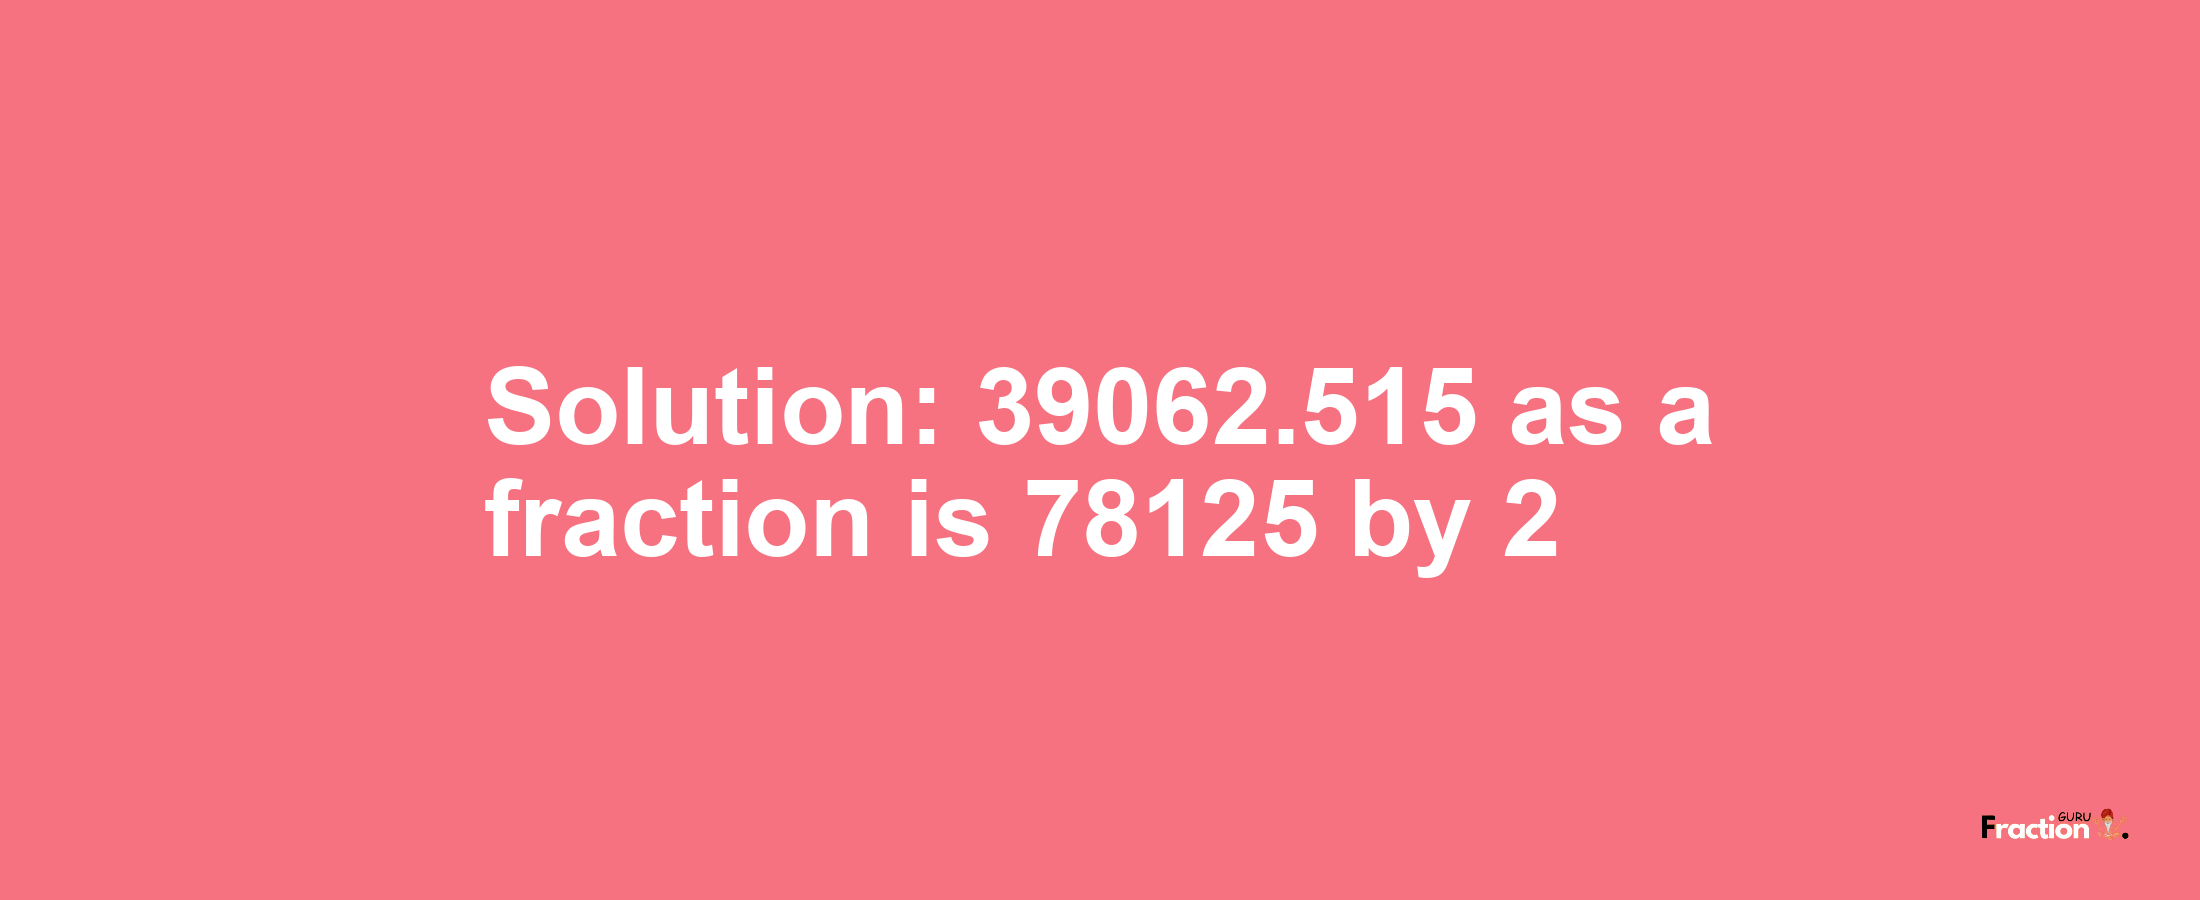 Solution:39062.515 as a fraction is 78125/2